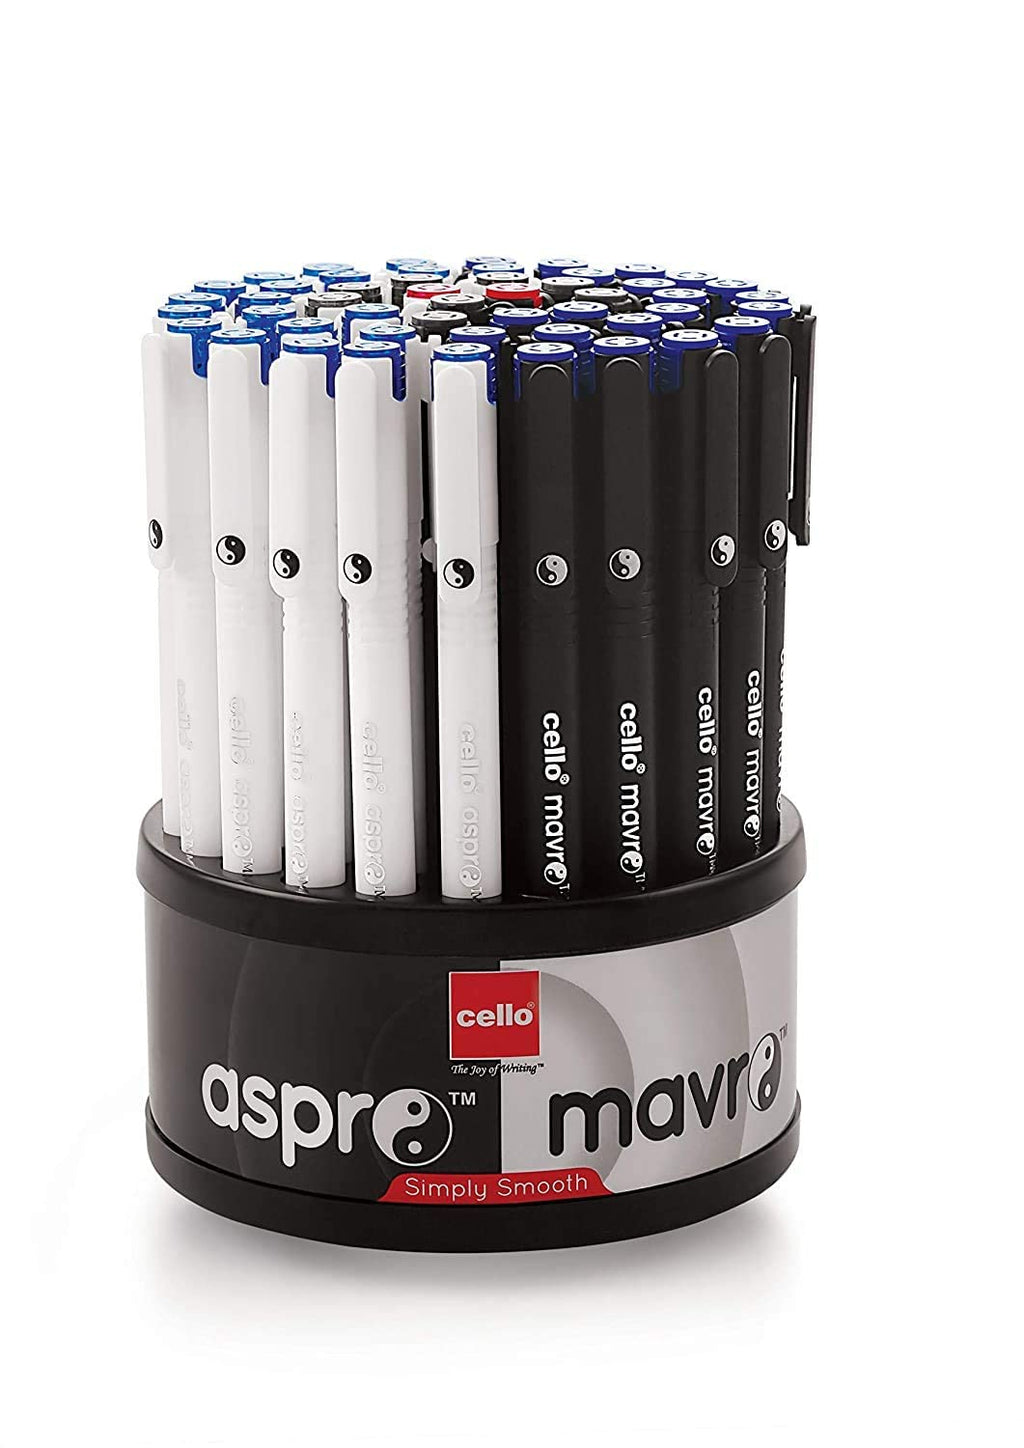 Cello Aspro and Mavro Black Ball Pen Bulk Pack of 850 Ball Pens with Stand